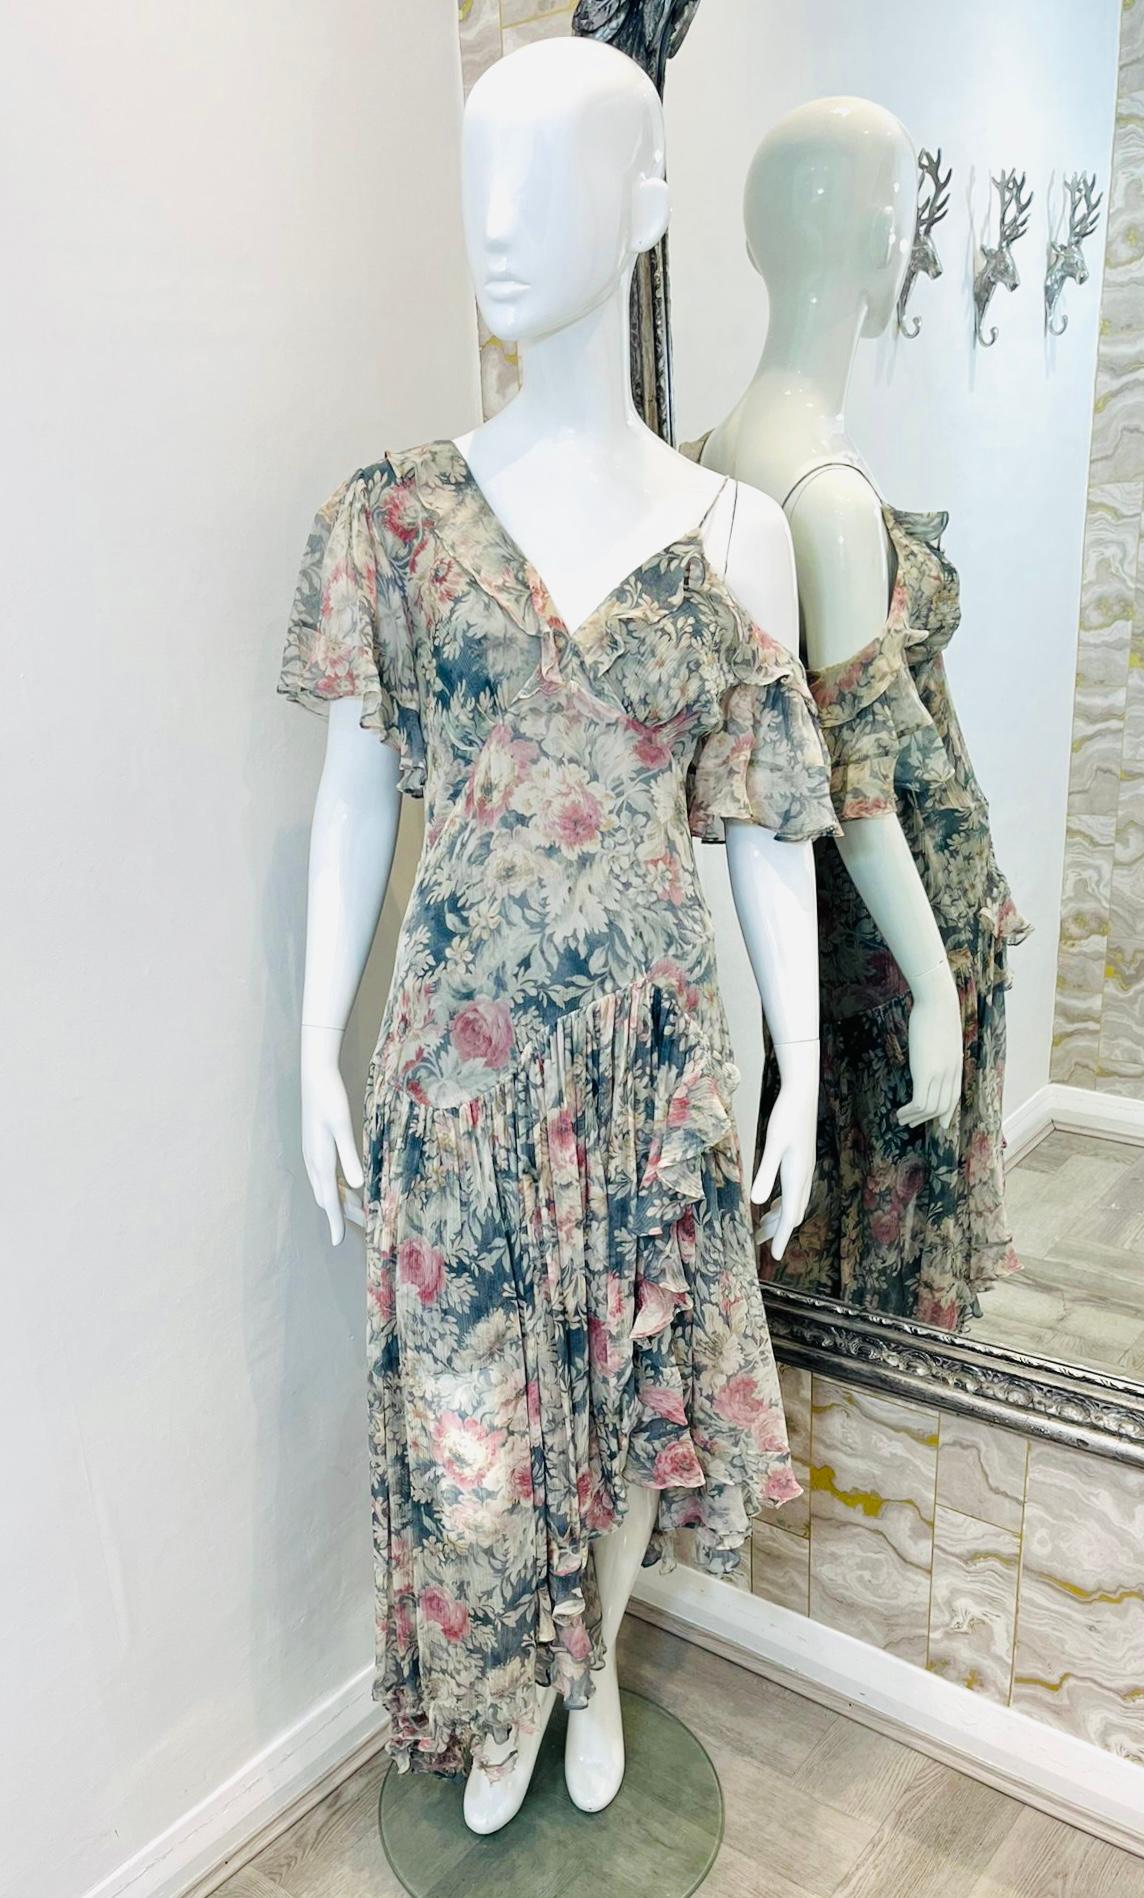 Zimmermann Asymmetric One-Shoulder Silk Dress

Grey green 'Cavalier' midi dress designed with floral print throughout.

Featuring frill detailing to the short sleeve and flared, pleated skirt.

Styled with spaghetti strap to one shoulder and front